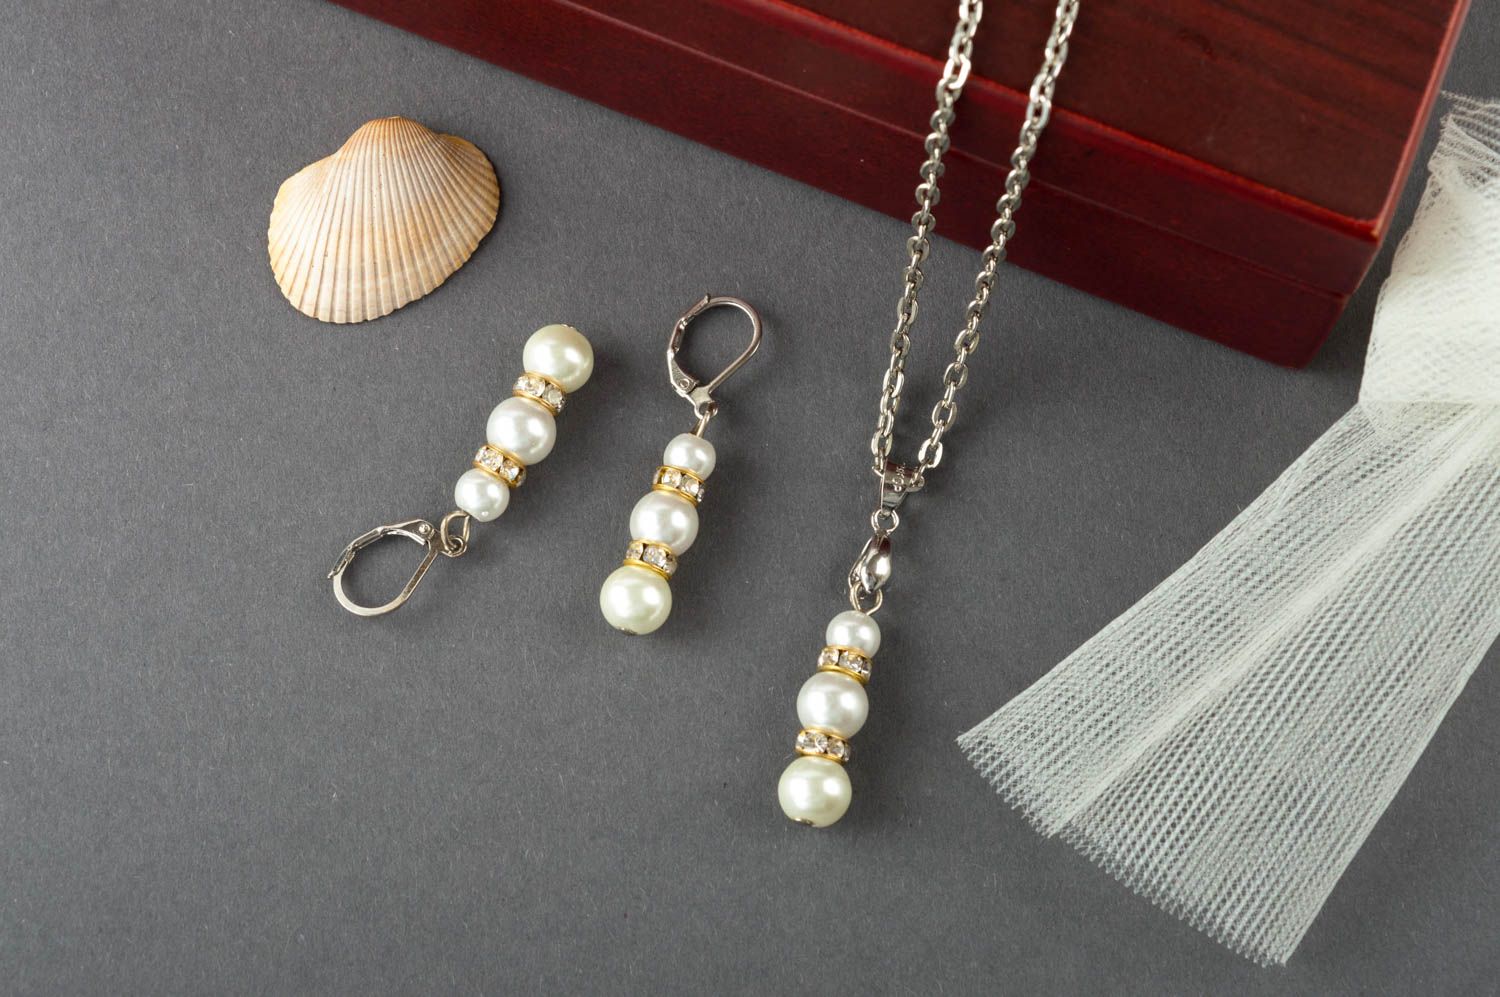 Handmade set of jewelry earrings and pendant artificial pearls accessories photo 1